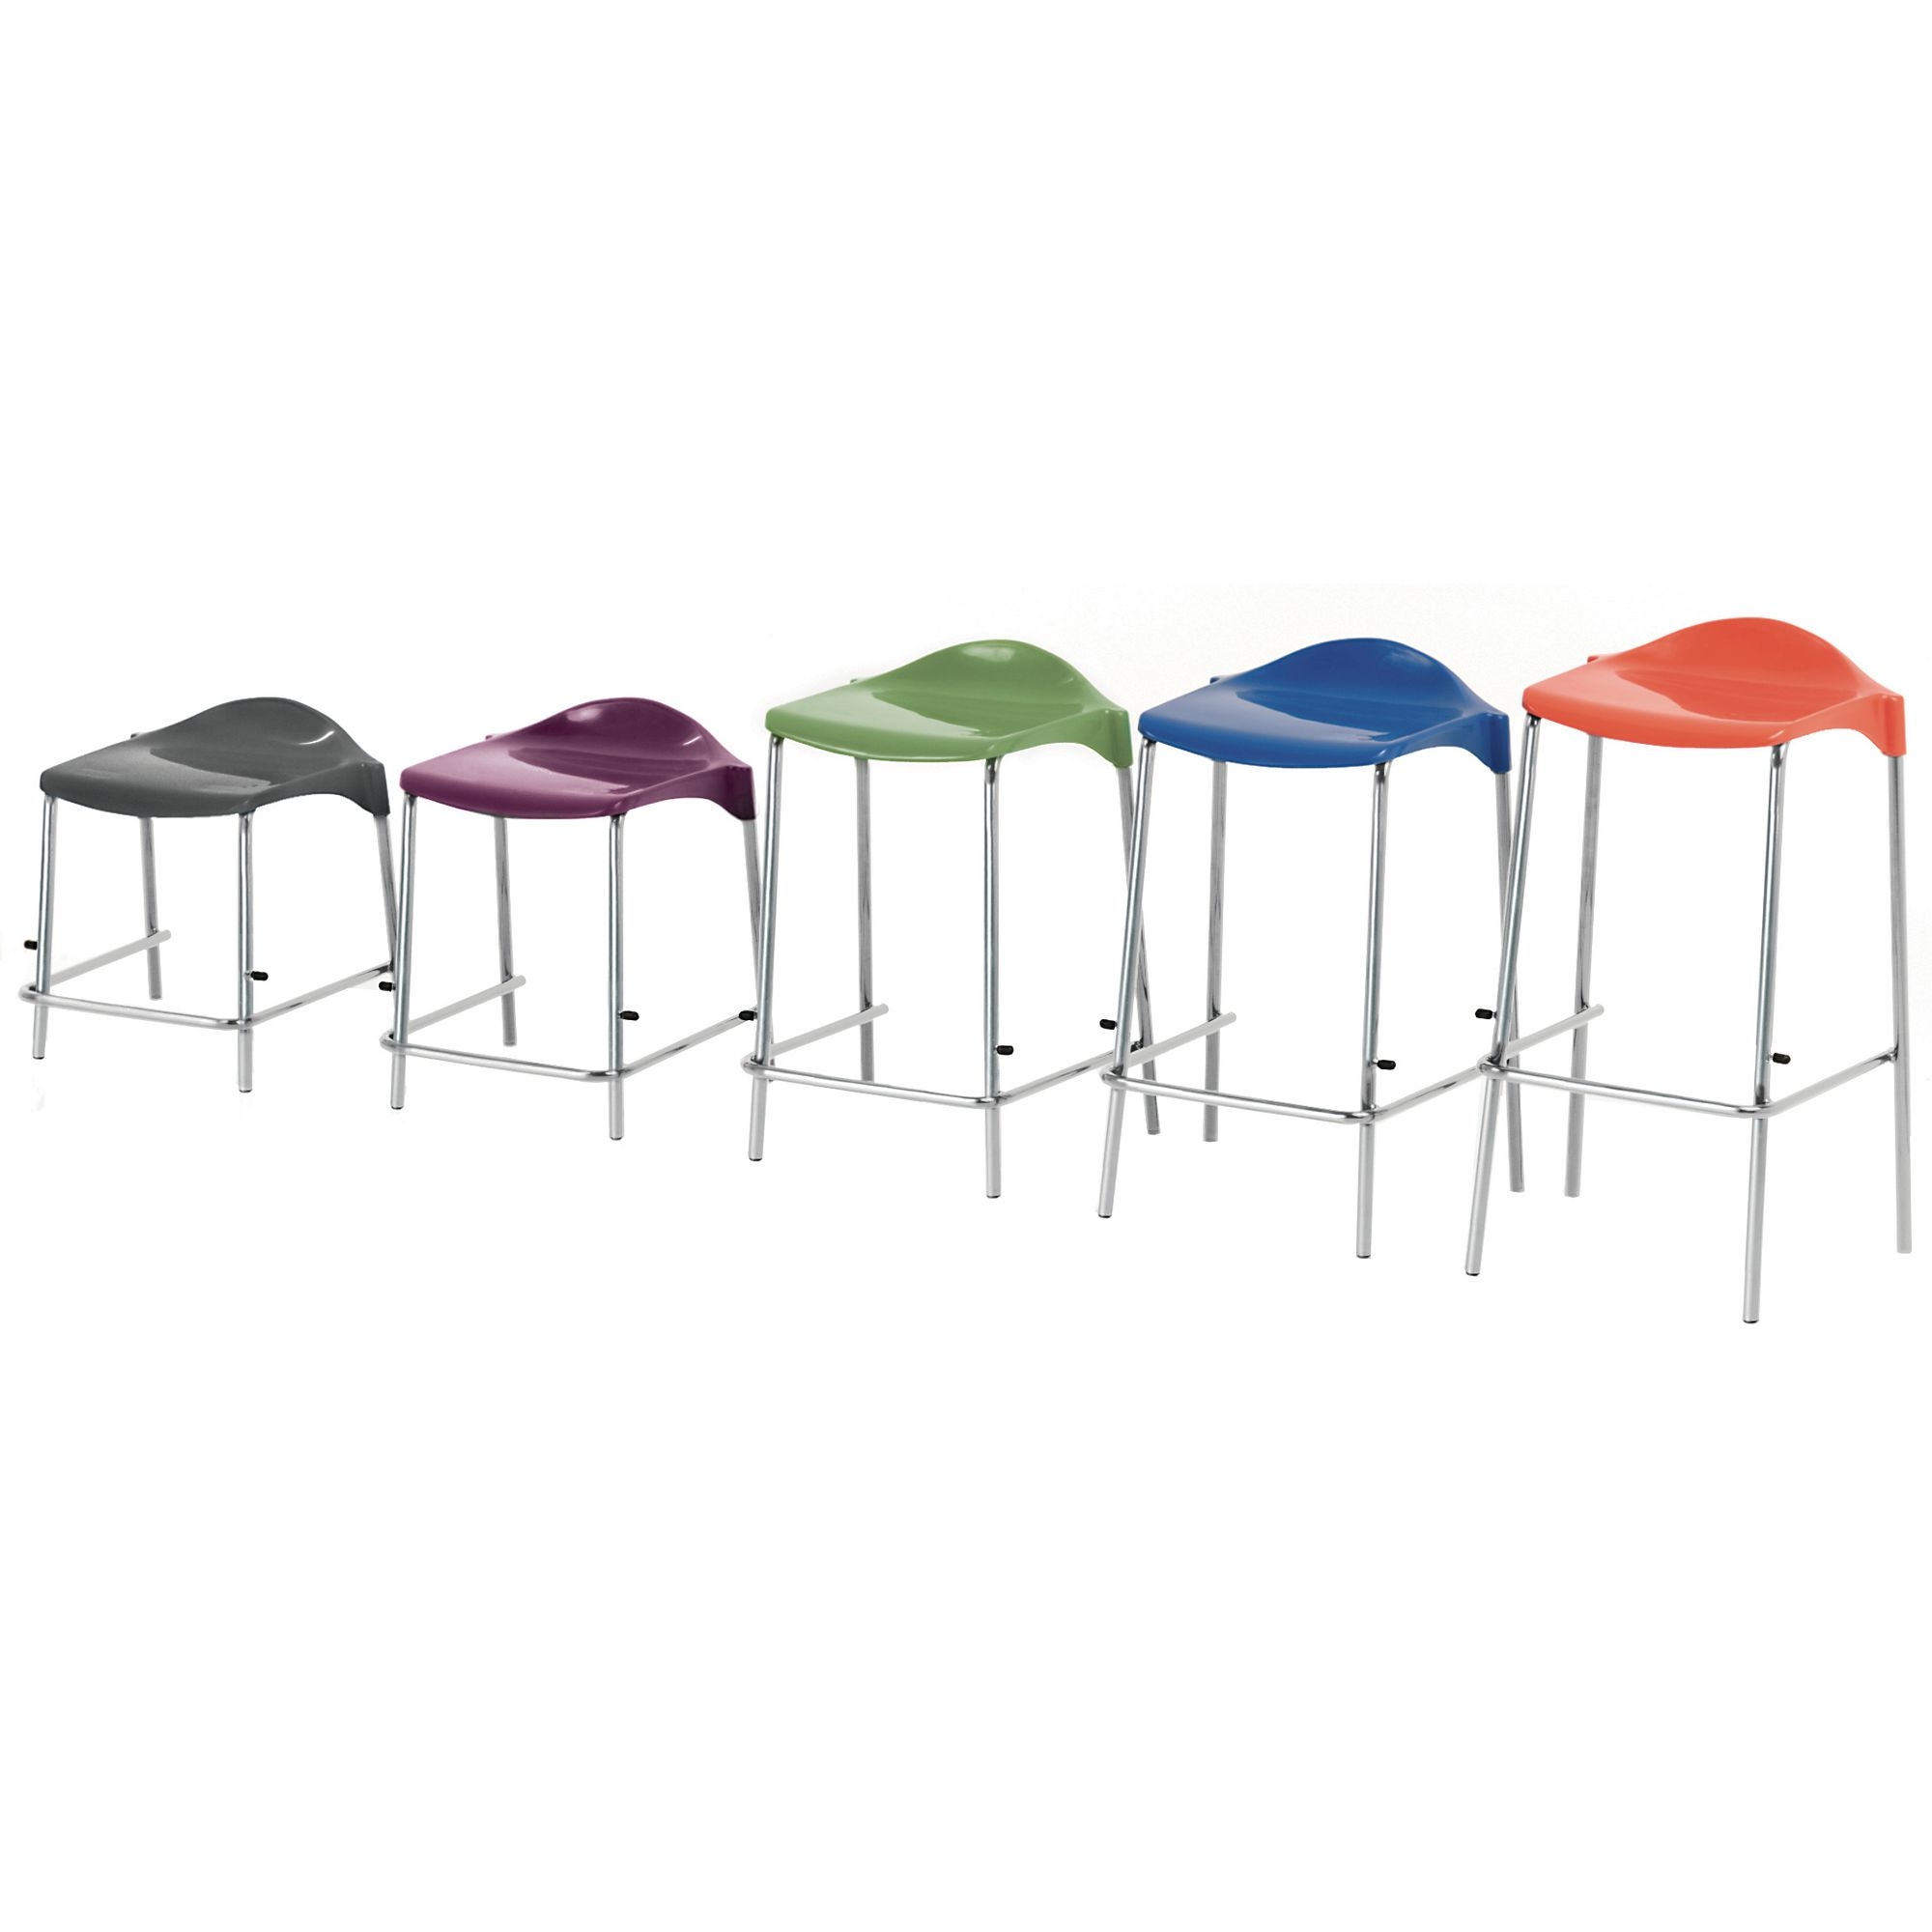 WSM four Legged Stool - Seat height: 445mm - Lime